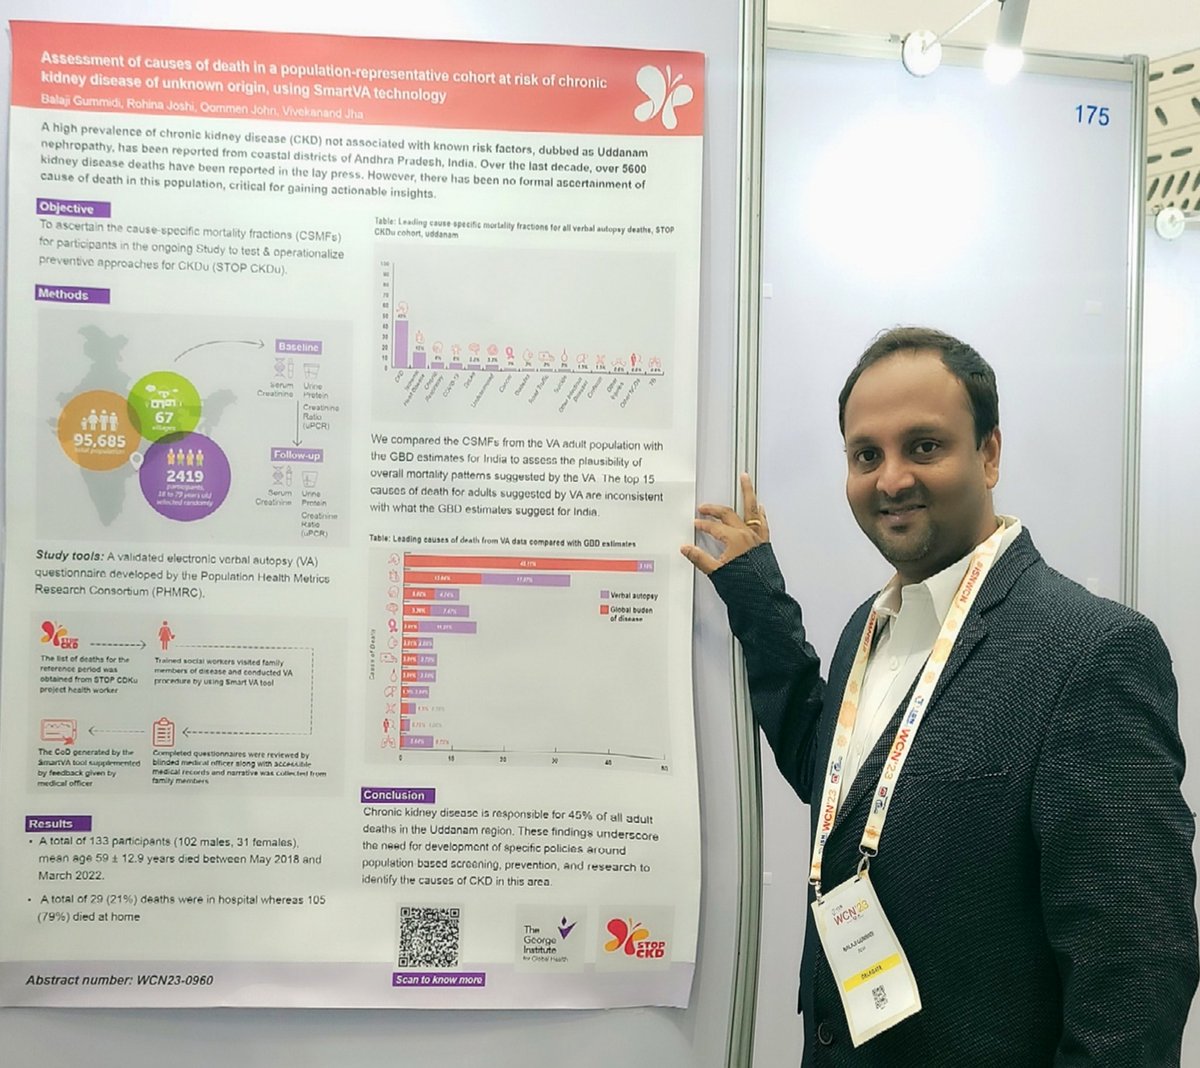 Presented a poster at the @ISNkidneycare World Congress of Nephrology #ISNWCN on 'Assessment of causes of death in a population-representative cohort at risk of CKD of unknown origin, using SmartVA technology' at uddanam region @GeorgeInstIN @oommen_john @rohinajoshi @vjha126